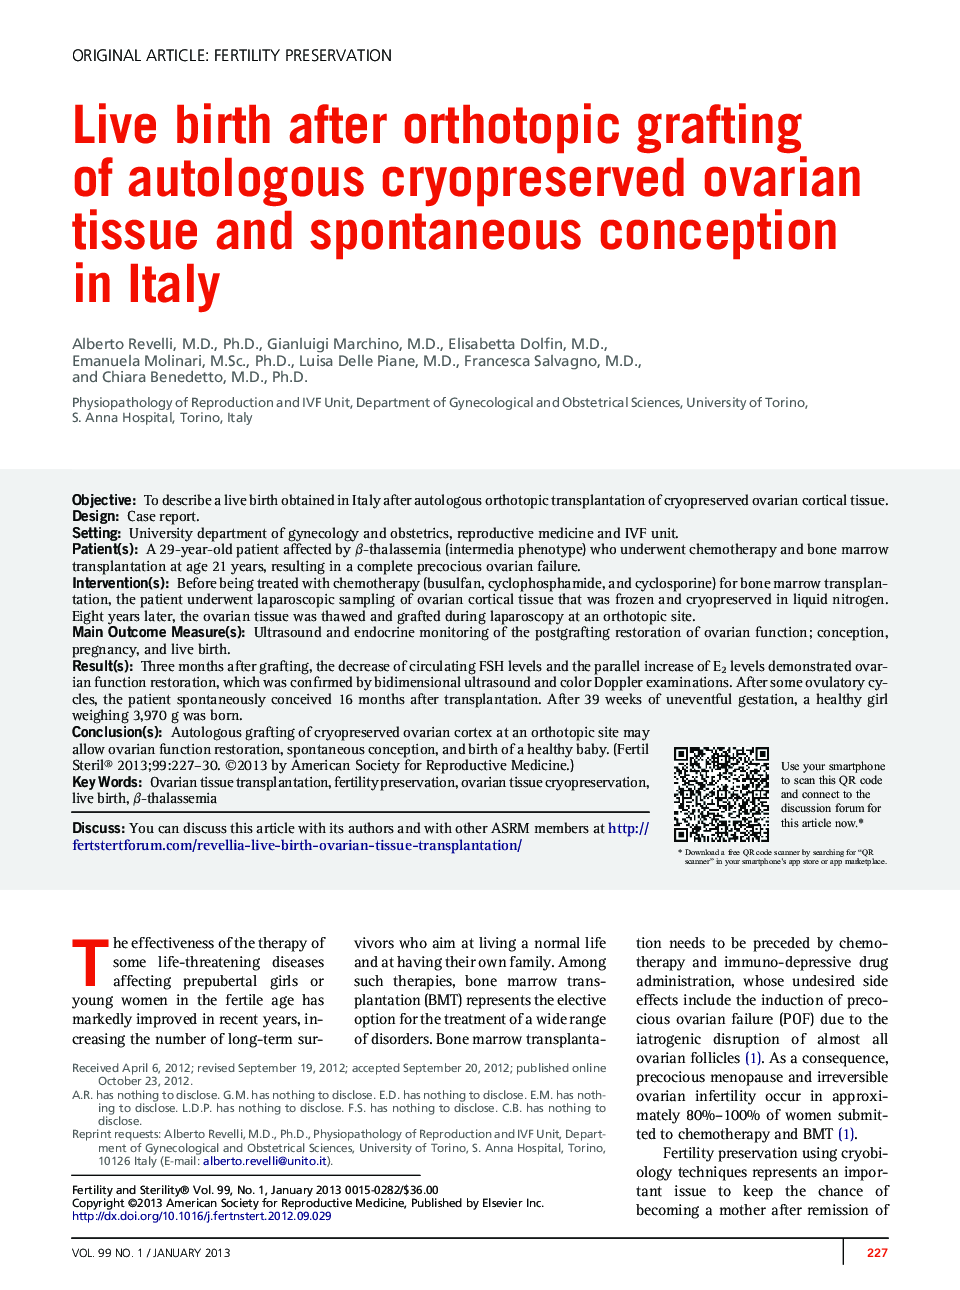 Live birth after orthotopic grafting of autologous cryopreserved ovarian tissue and spontaneous conception in Italy